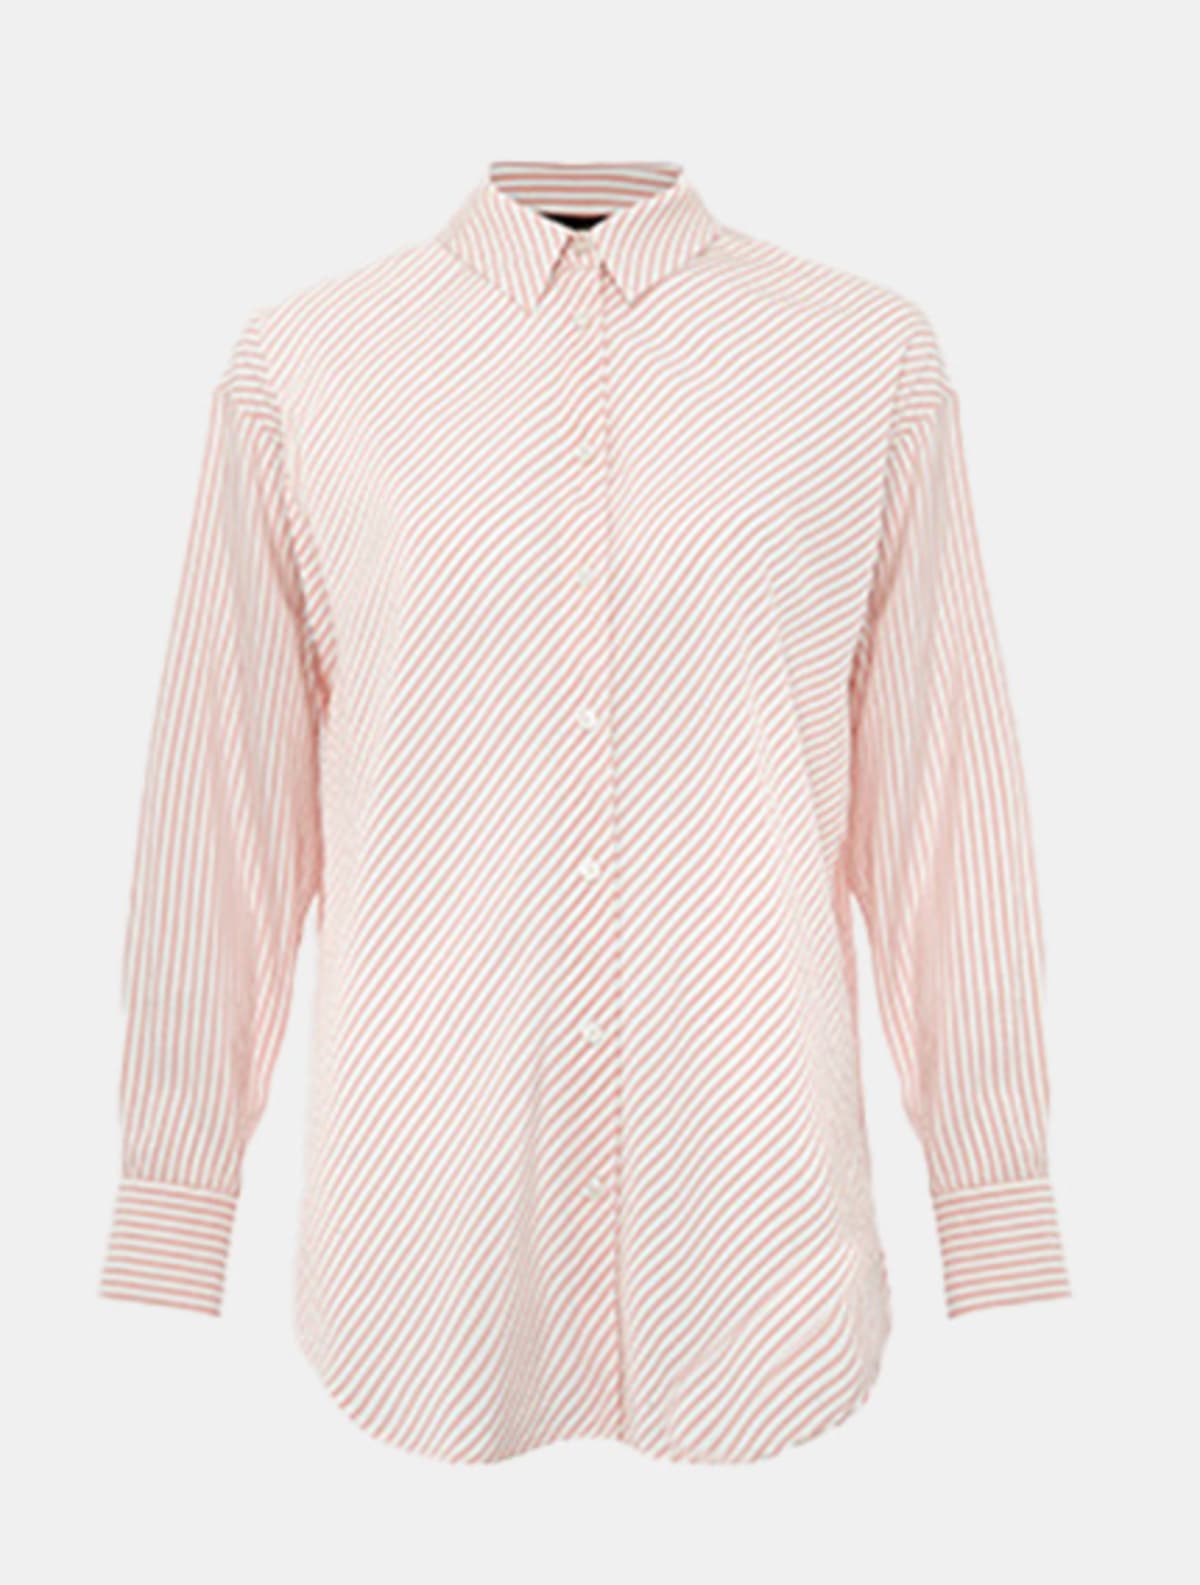 Phase Eight striped shirt